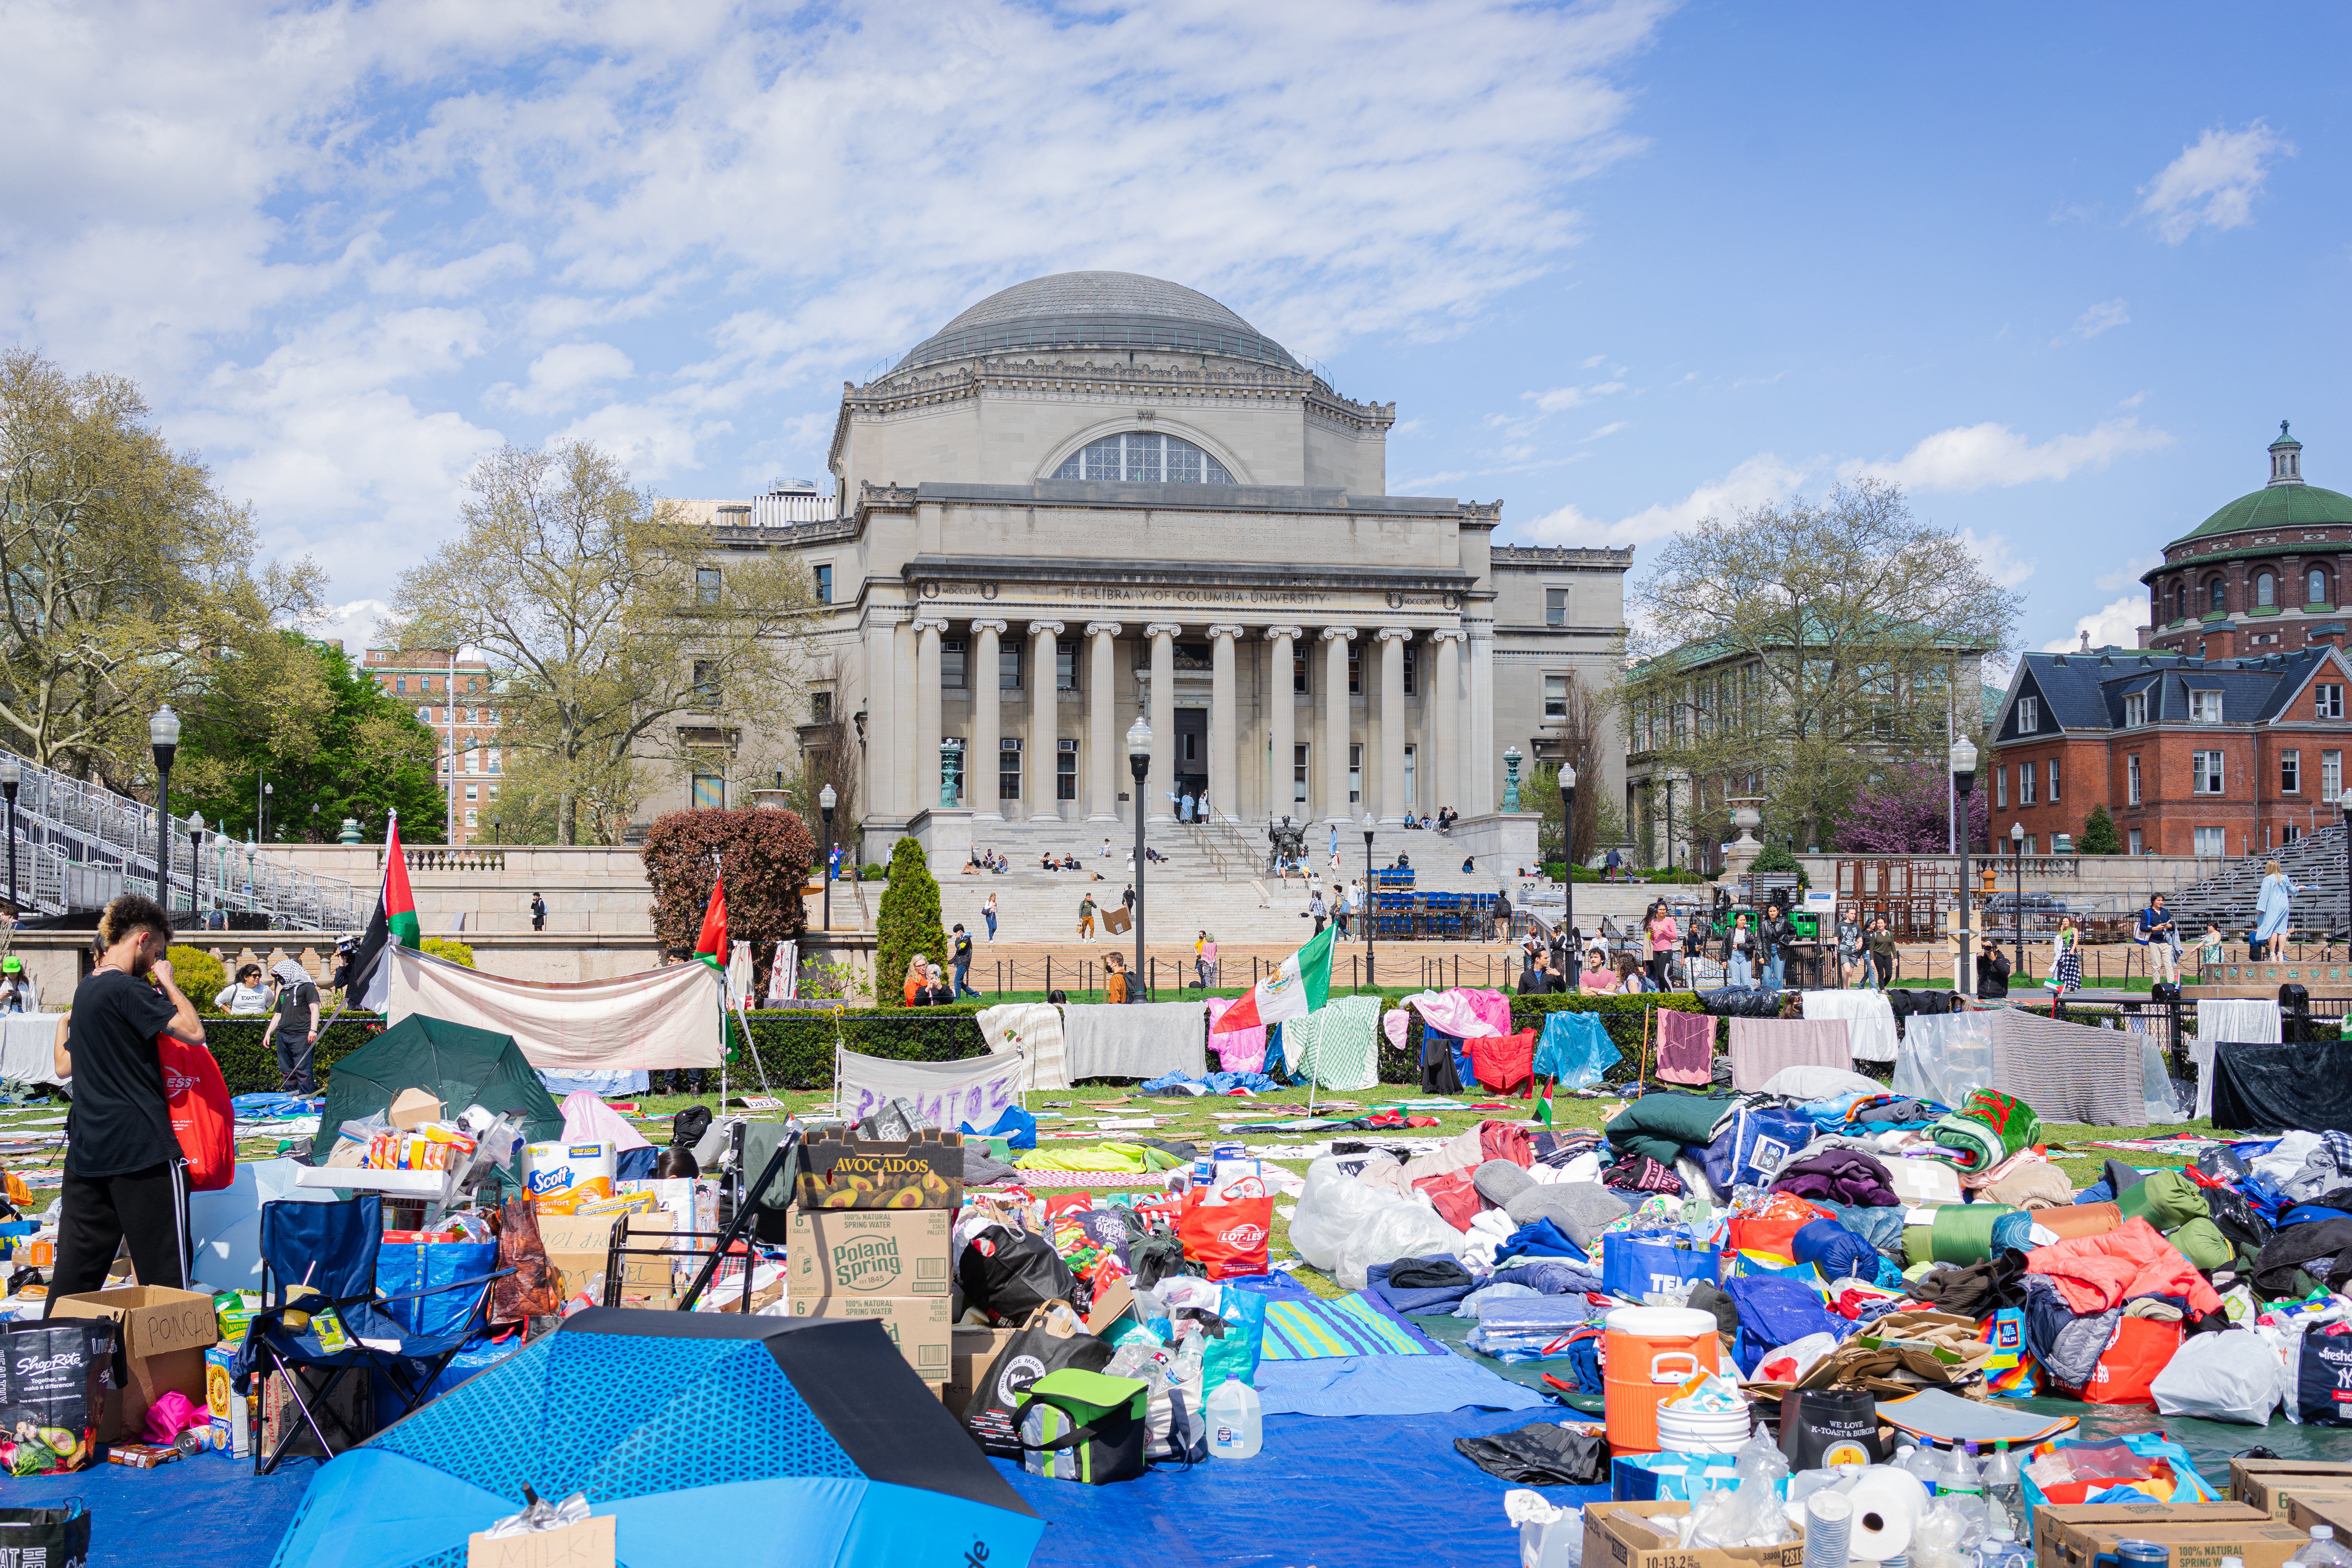 Columbia Students Are Getting the National Media Treatment. It’s Not Helping.